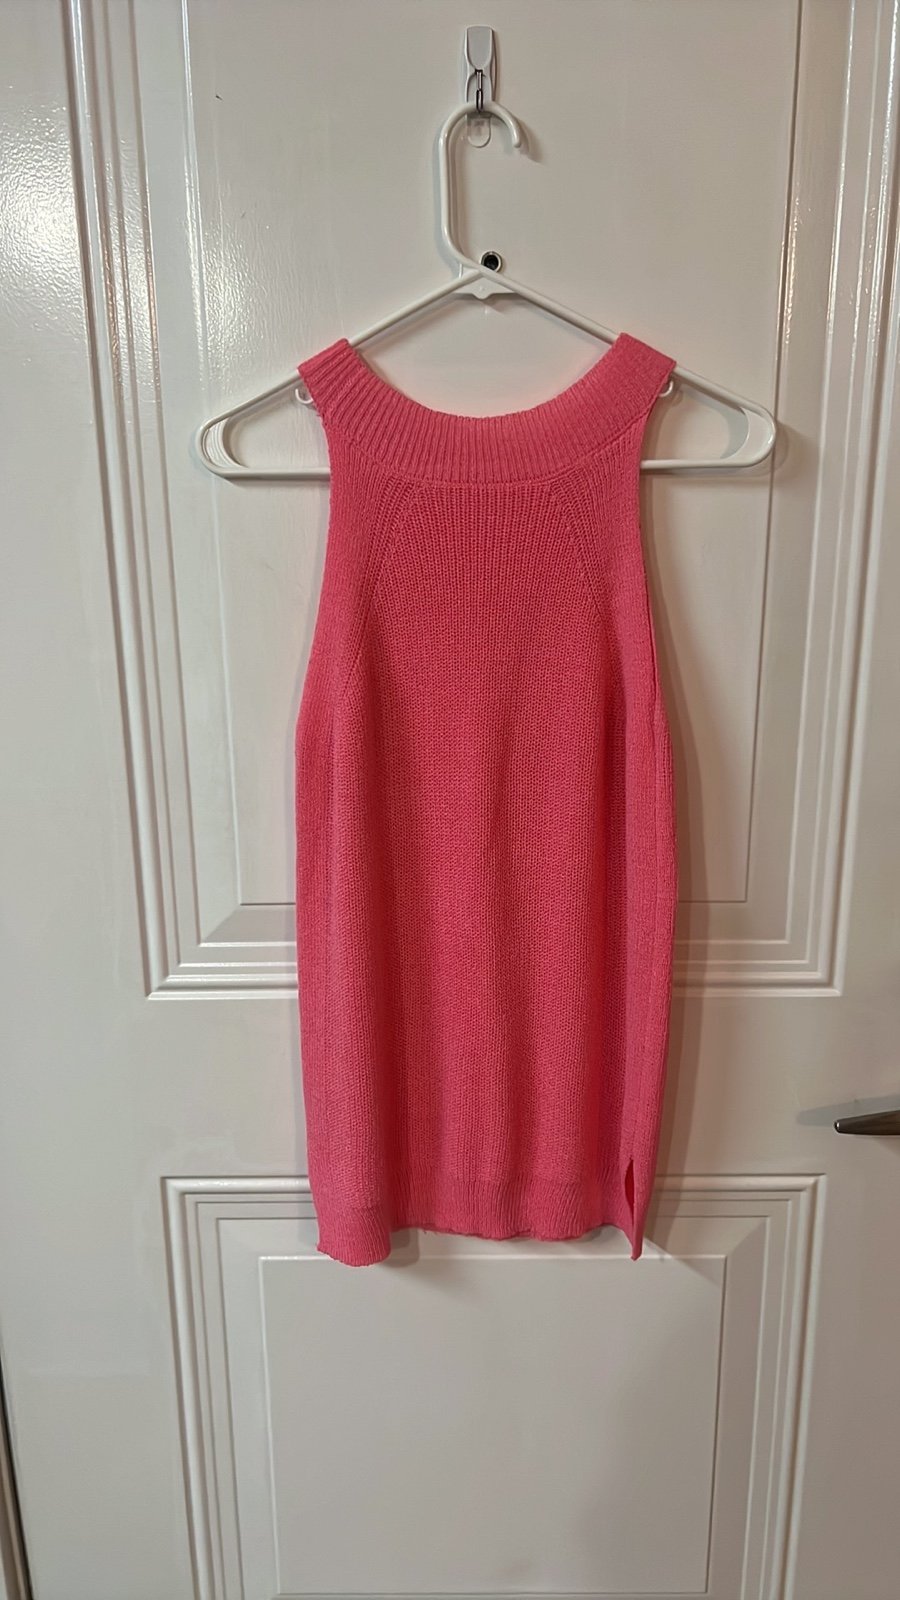 the Lowest price Bright Pink sweater tank. Size M from 